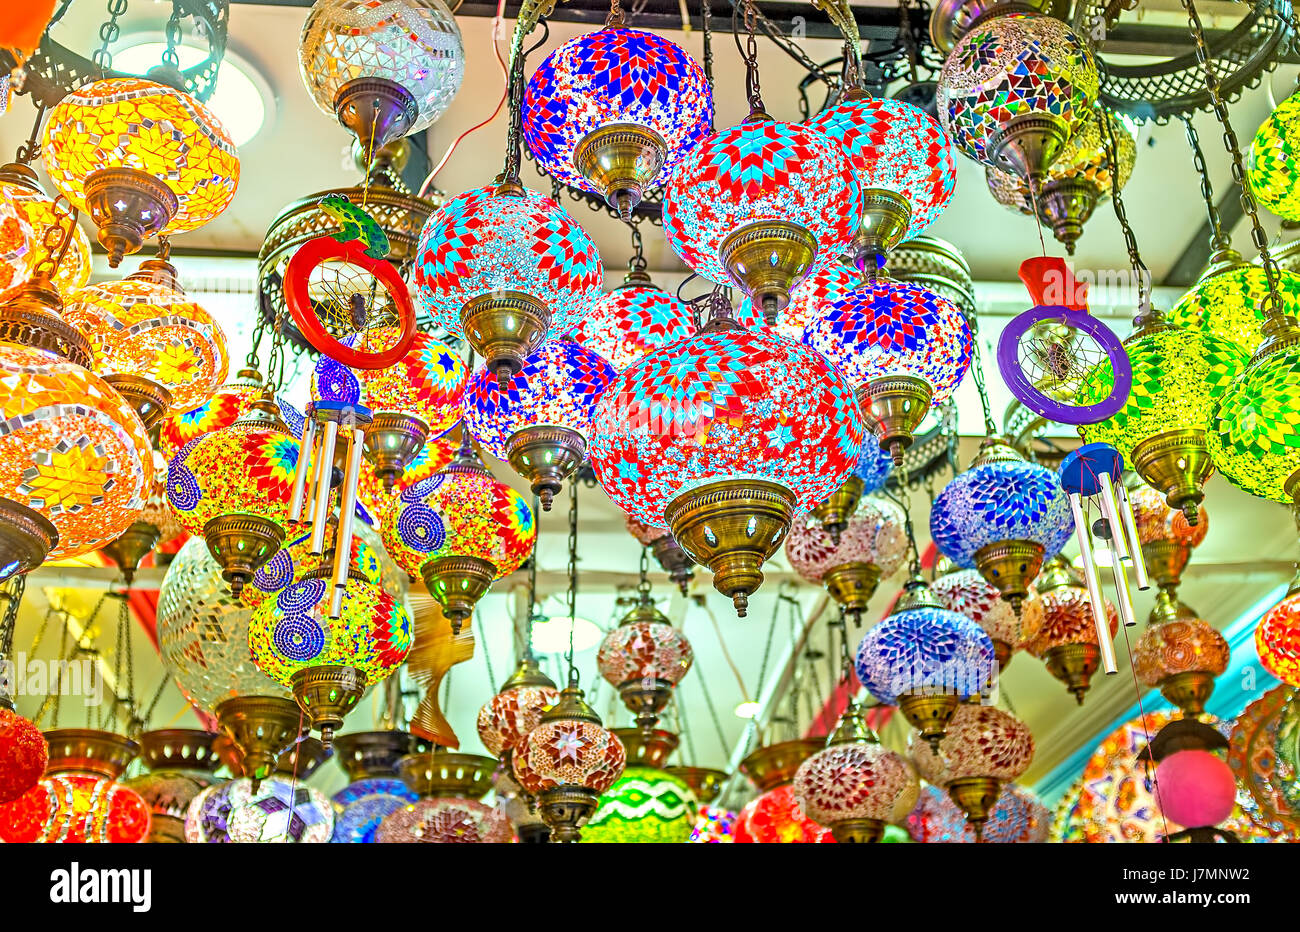 KEMER, TURKEY - MAY 5, 2017: Hundreds of different stained glass plafonds with colorful patterns on sailing of the lighting store, on May 5 in Kemer. Stock Photo